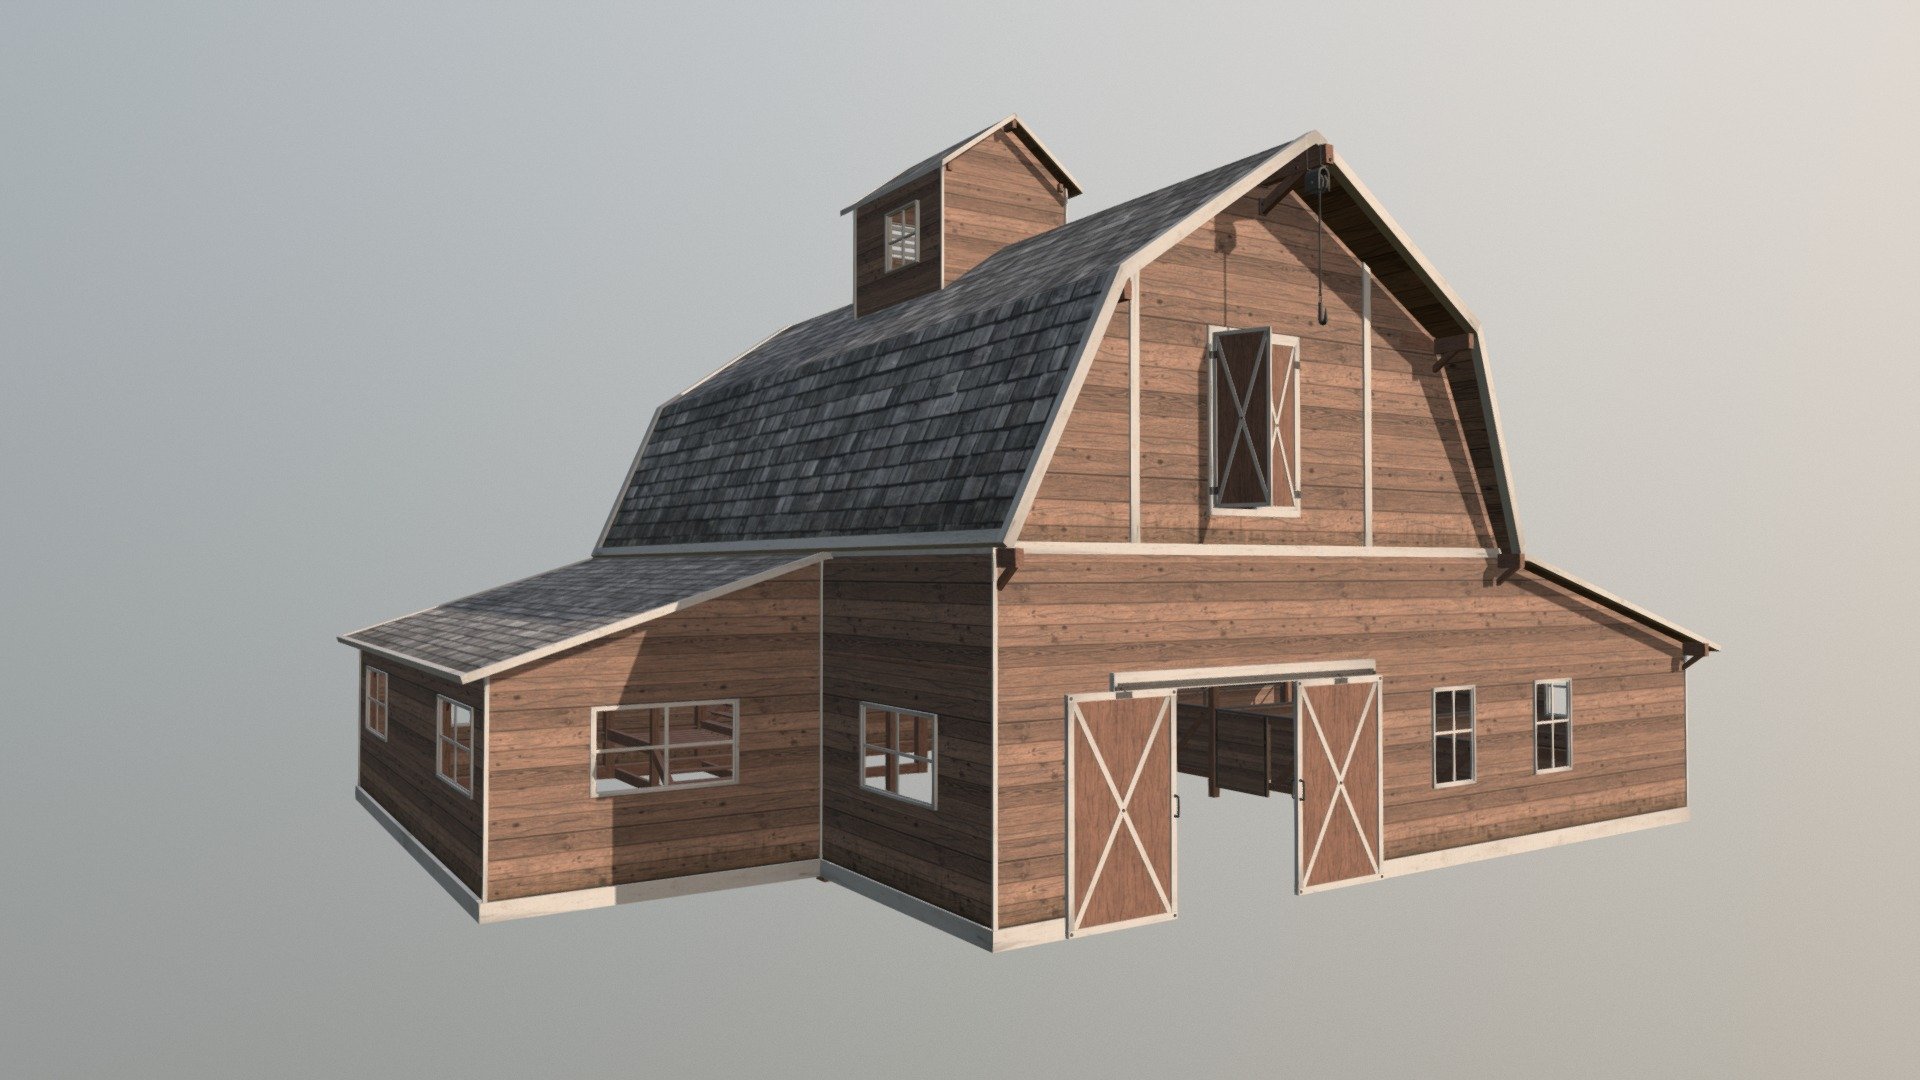 A close up view of the main barn building that is part of the &ldquo;Farm Assets